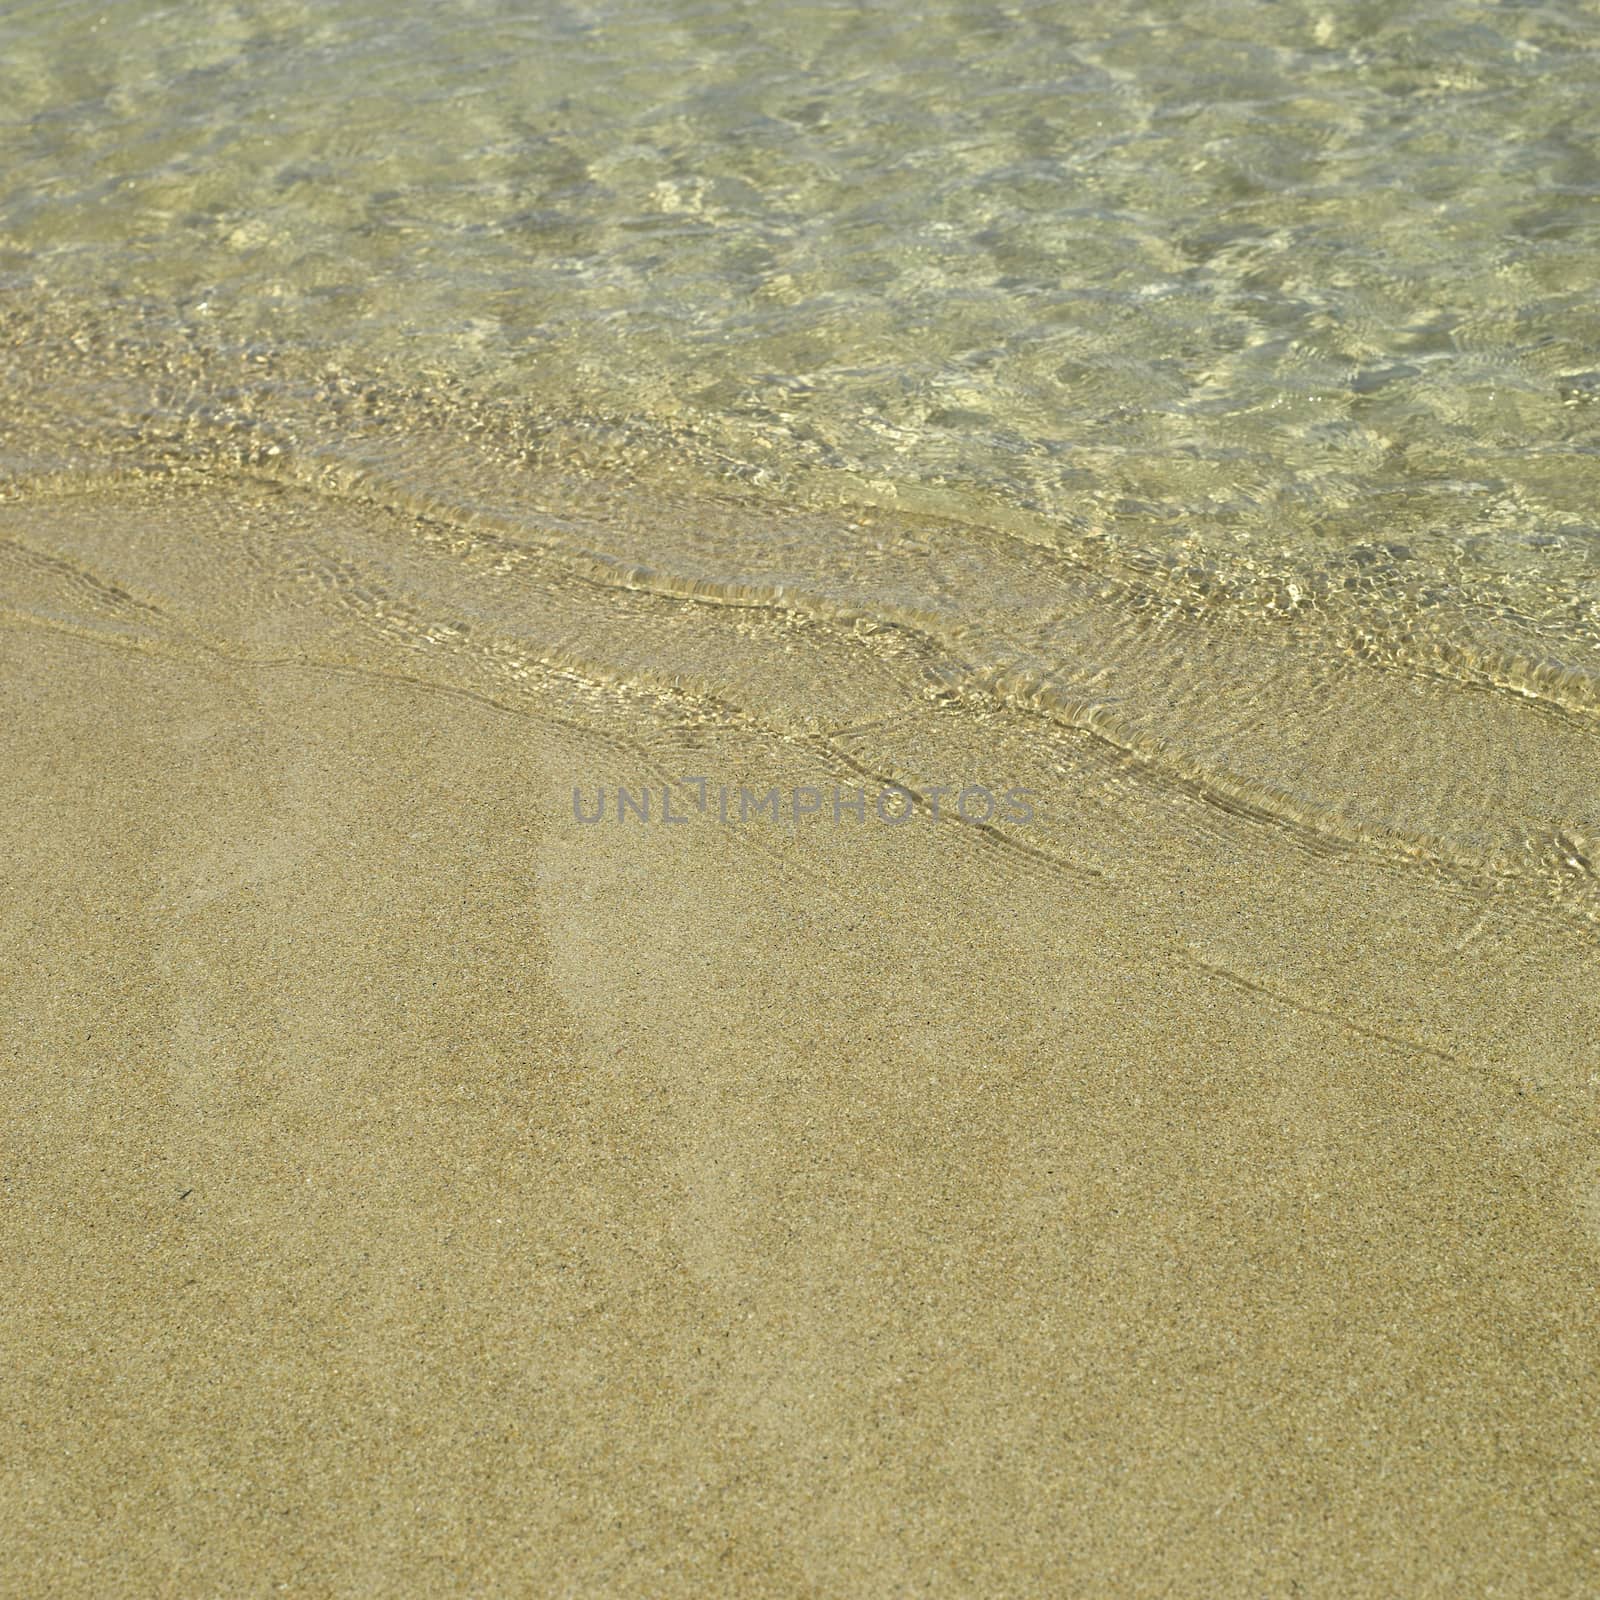 Clear ocean water on gold sand